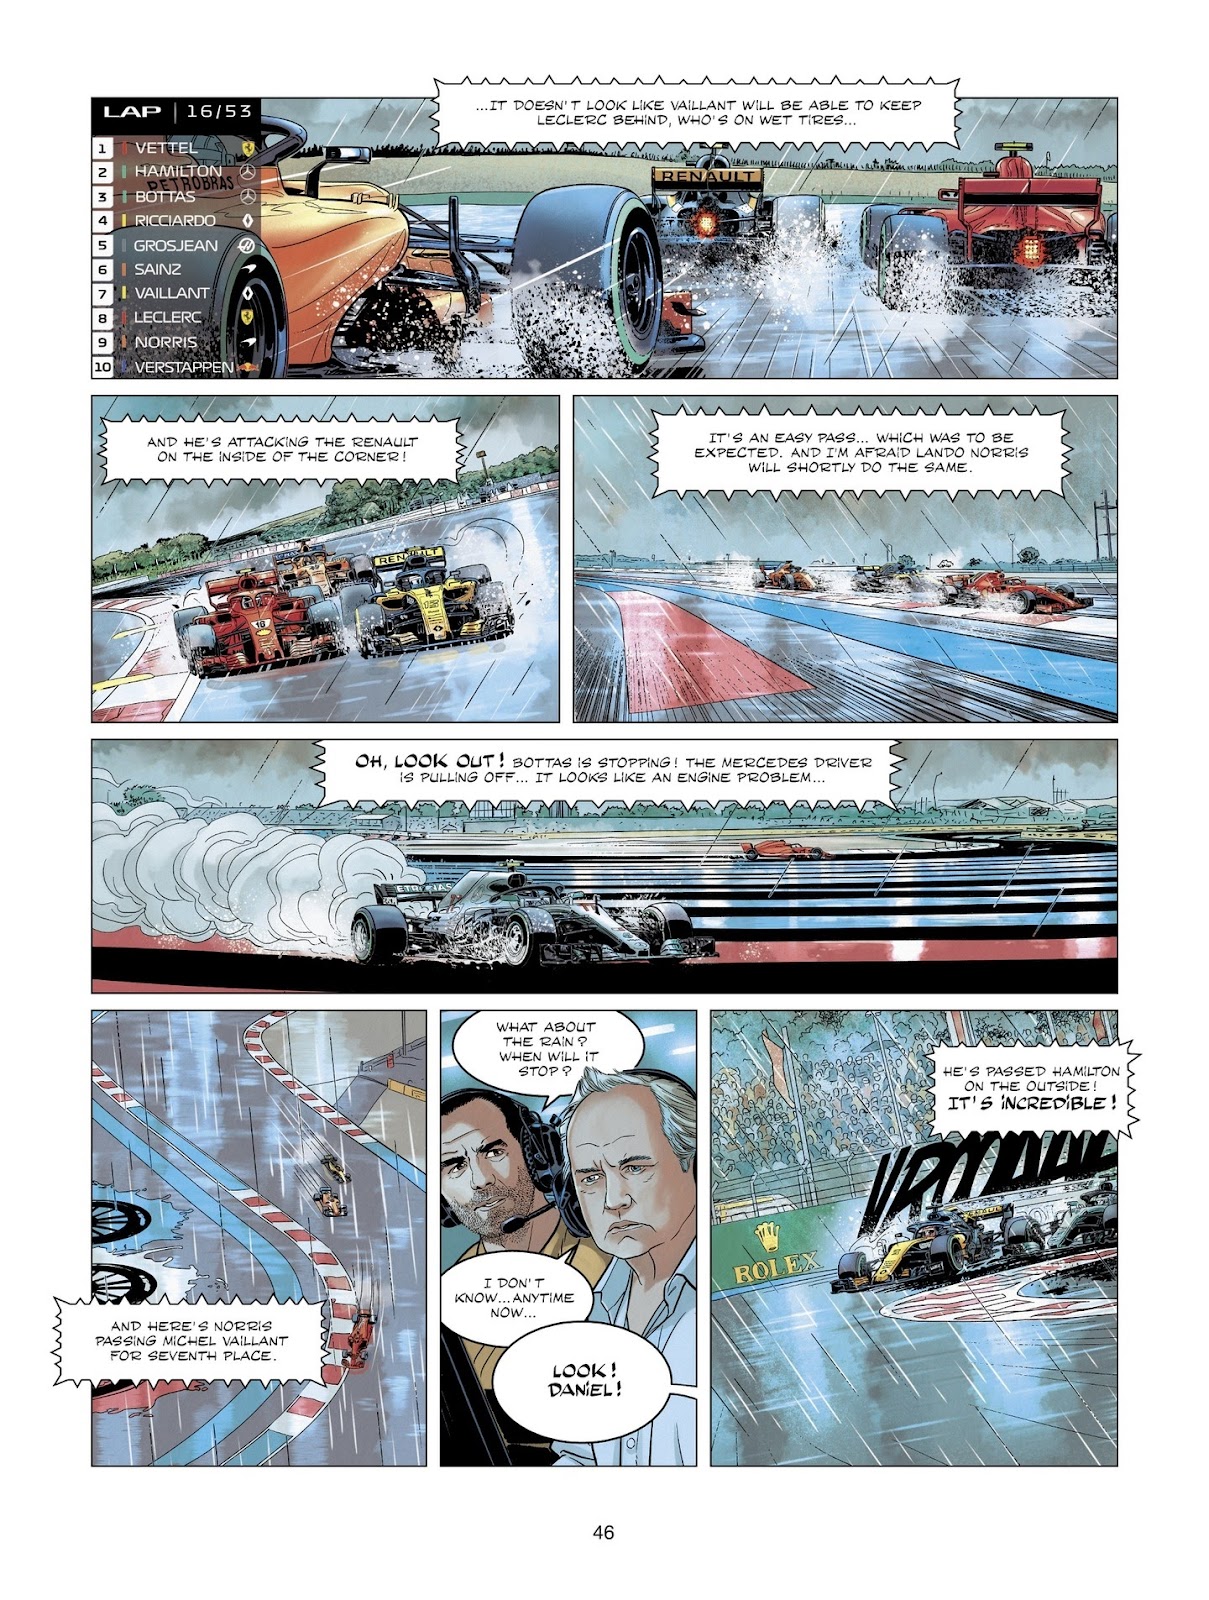 Michel Vaillant issue 8 - Page 46